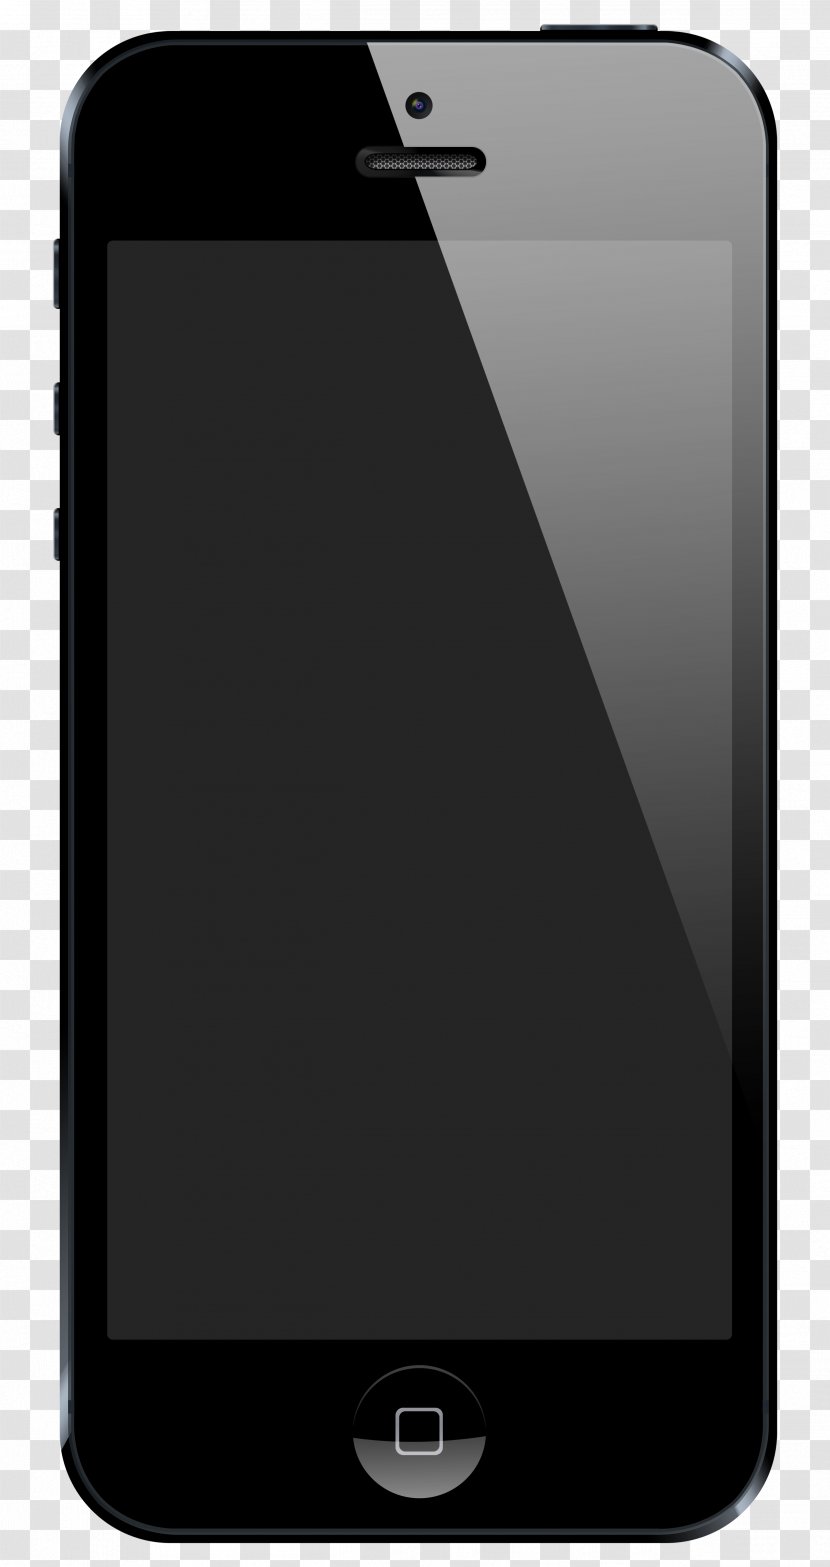 IPhone 4S 5 6 7 - Smartphone - Phone Clipart Download Transparent PNG